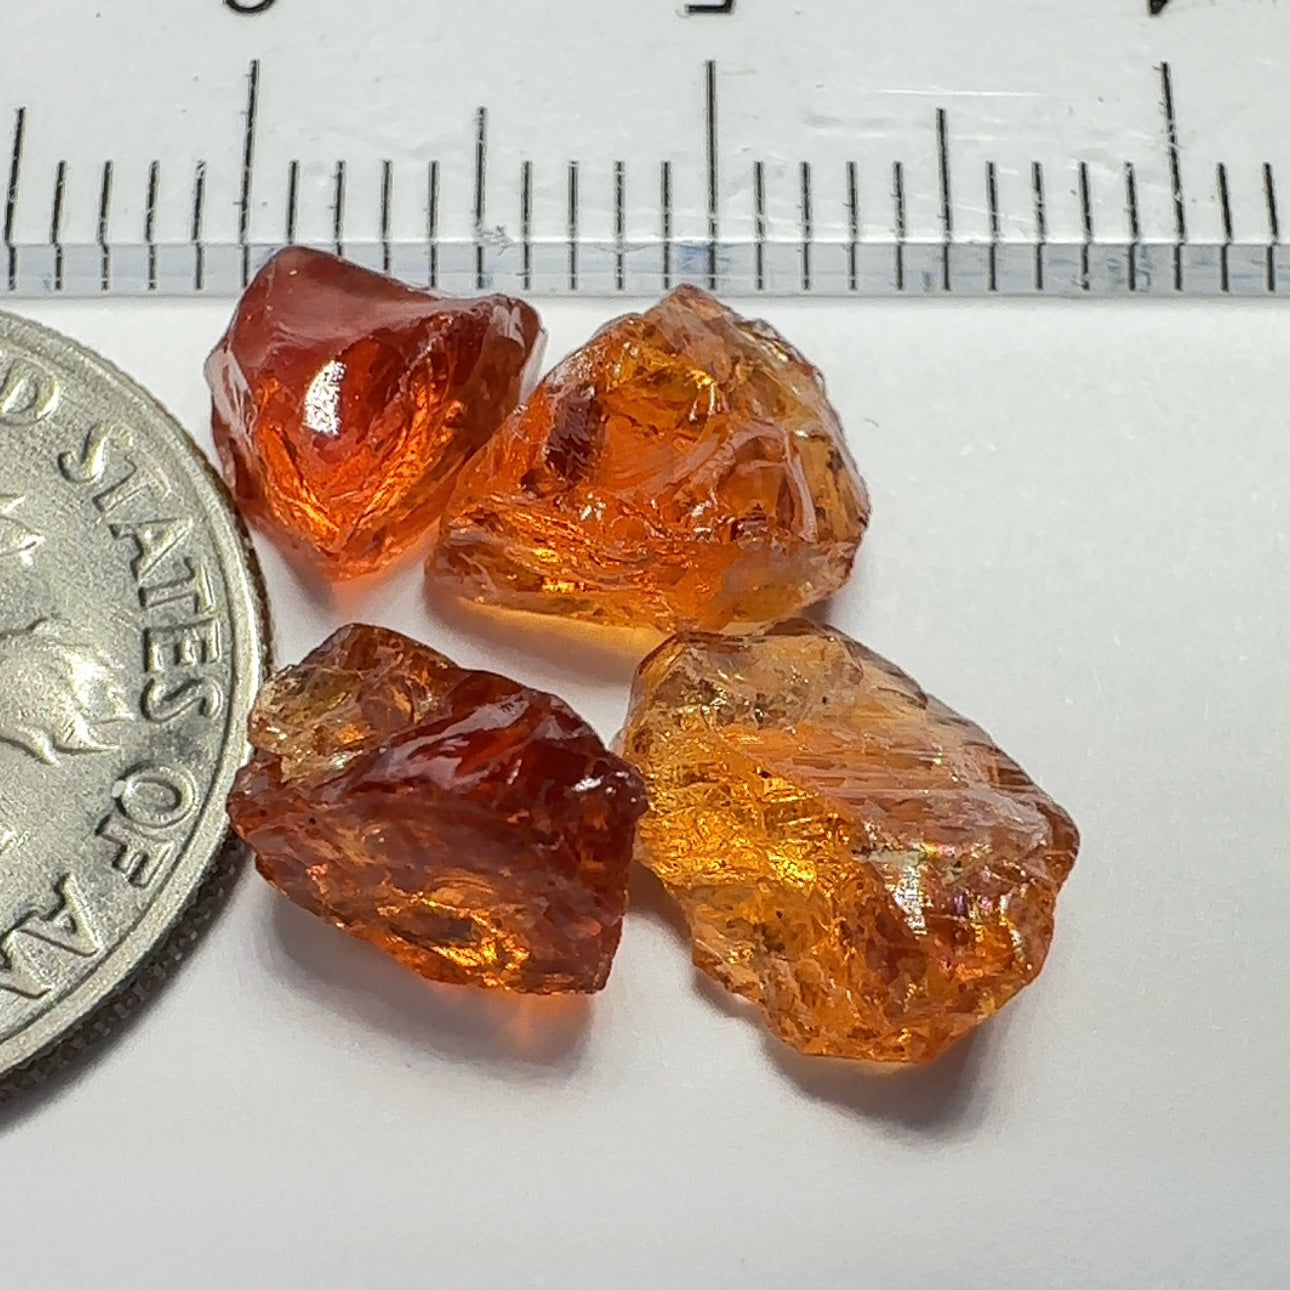 9.18ct Spessartite Carrot Colour Garnet Lot, Tanzania. Untreated Unheated. 2.16ct - 2.42ct. Slightly Included